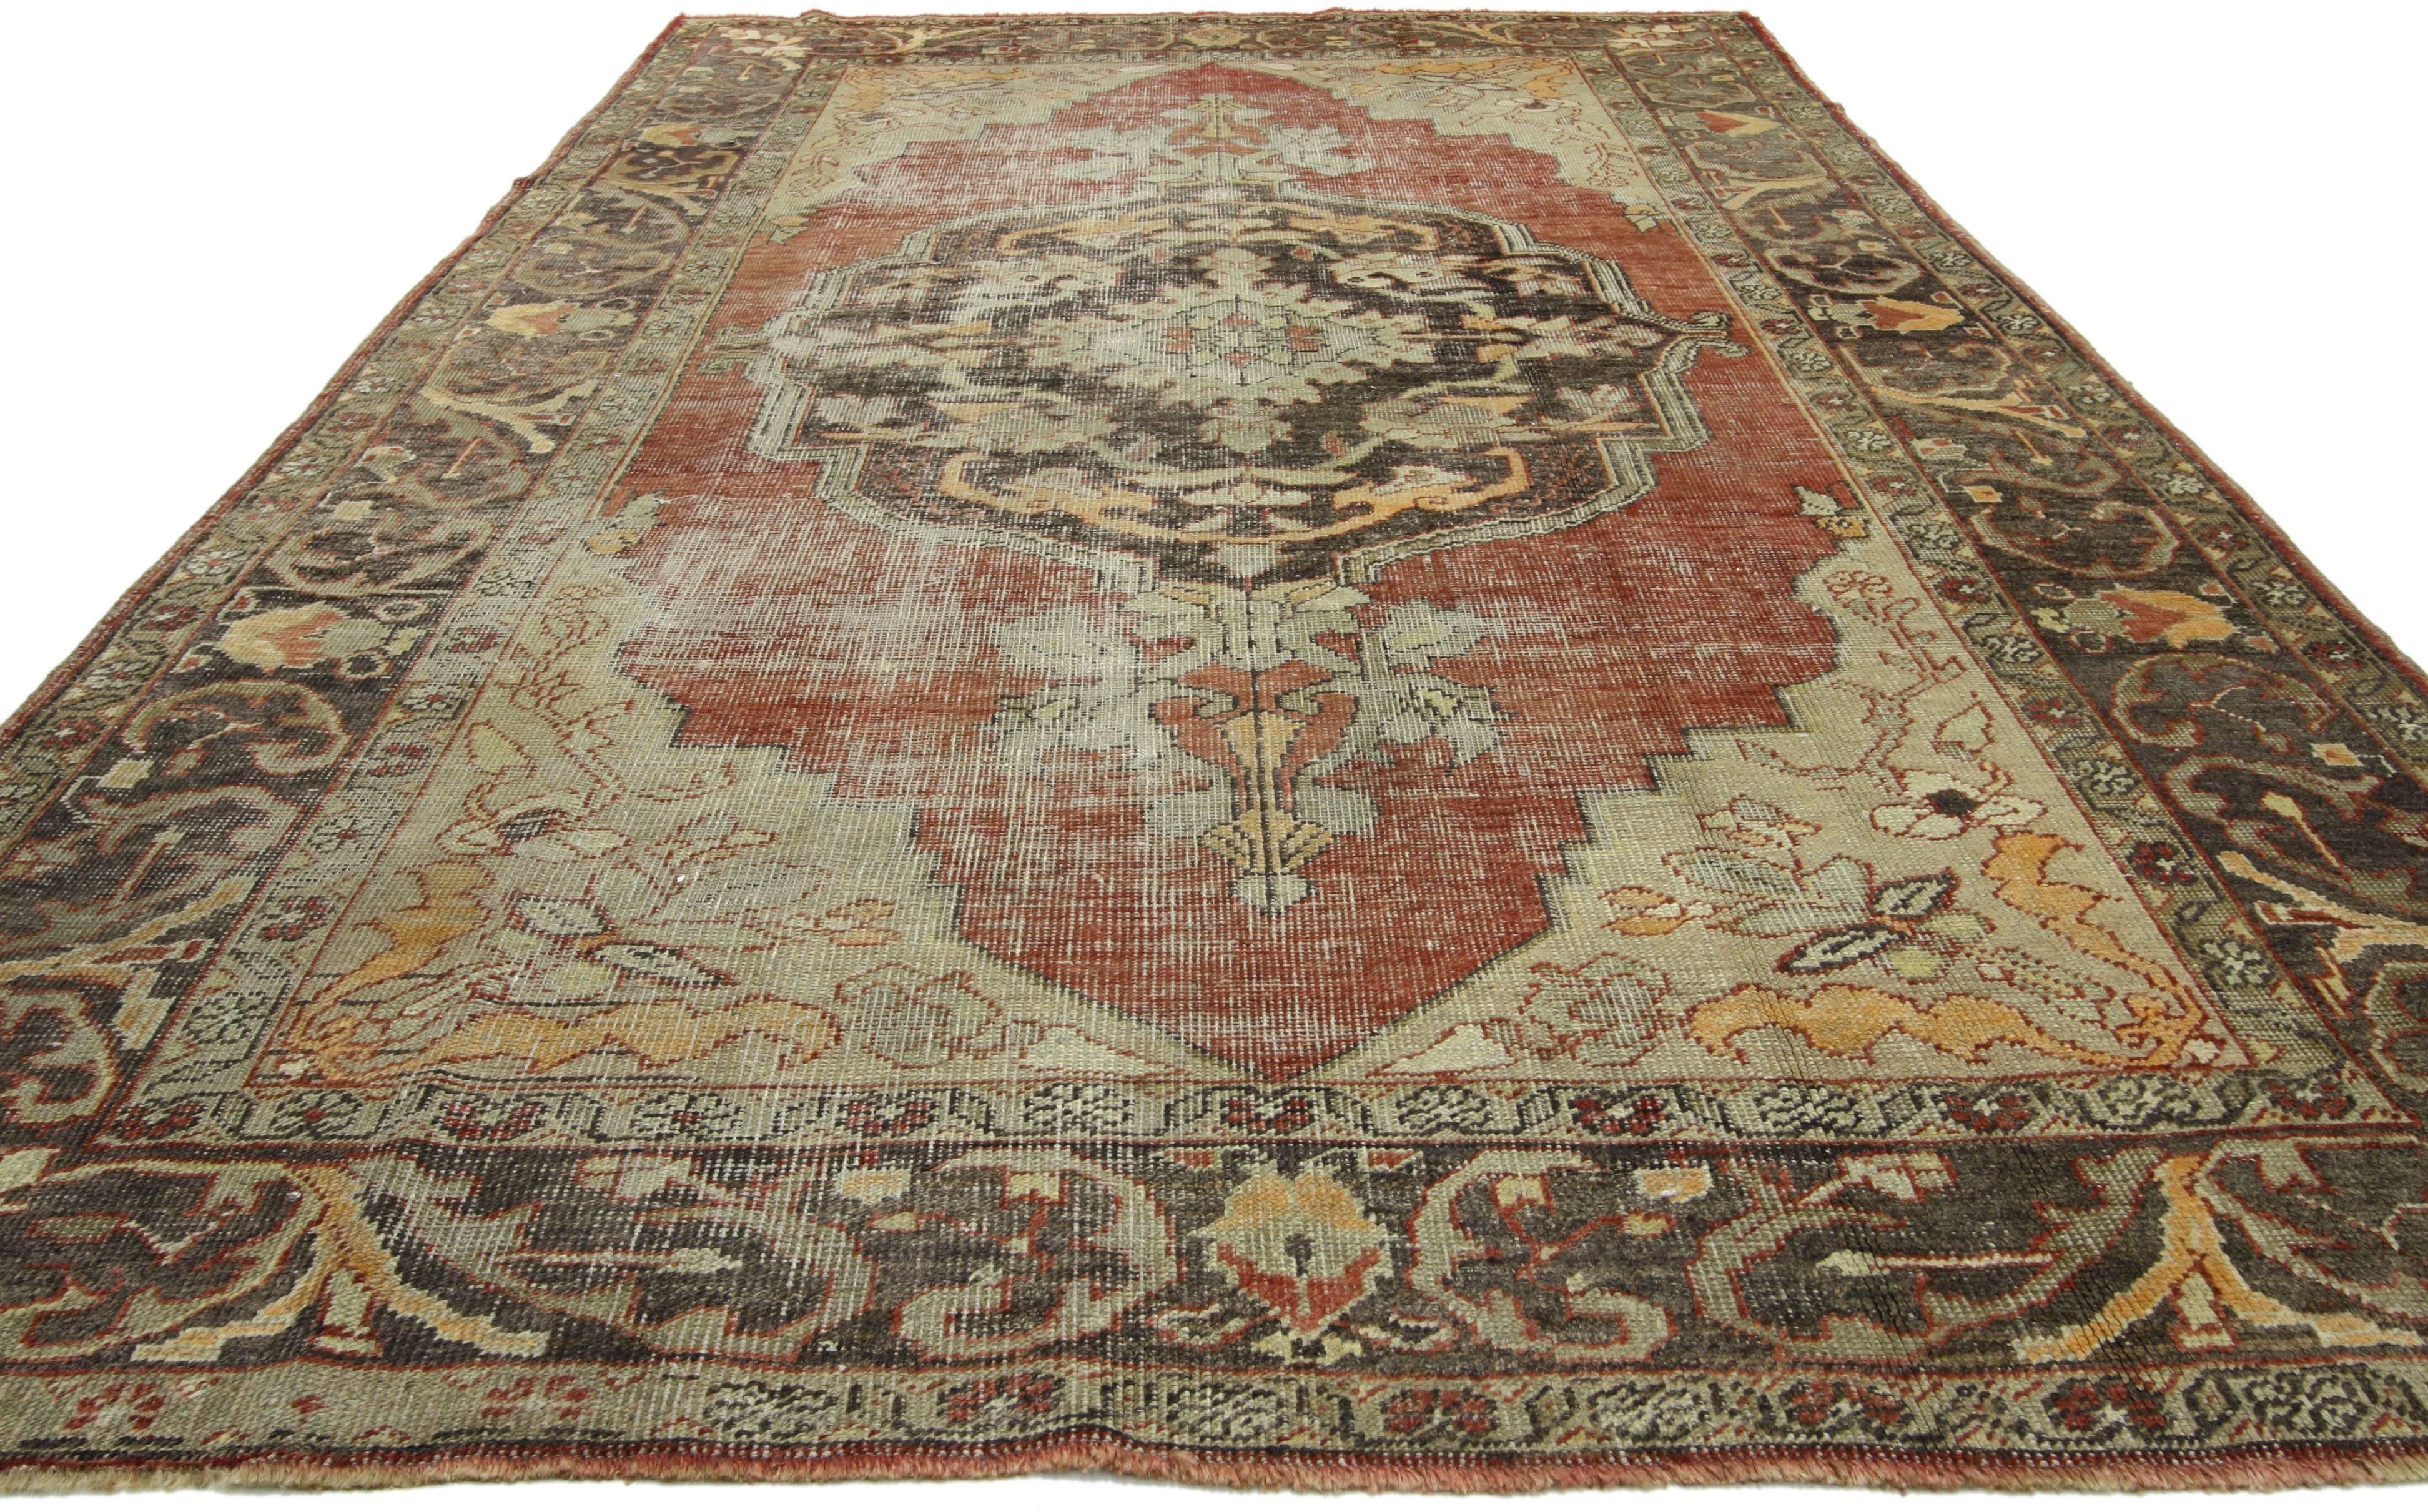 51296 Distressed Vintage Turkish Oushak Rug with Rustic English Manor Style 06'04 x 10'06. With its warm spice-tones and lovingly timeworn appearance, this hand knotted wool distressed vintage Turkish Oushak rug embraces rustic English Manor style.